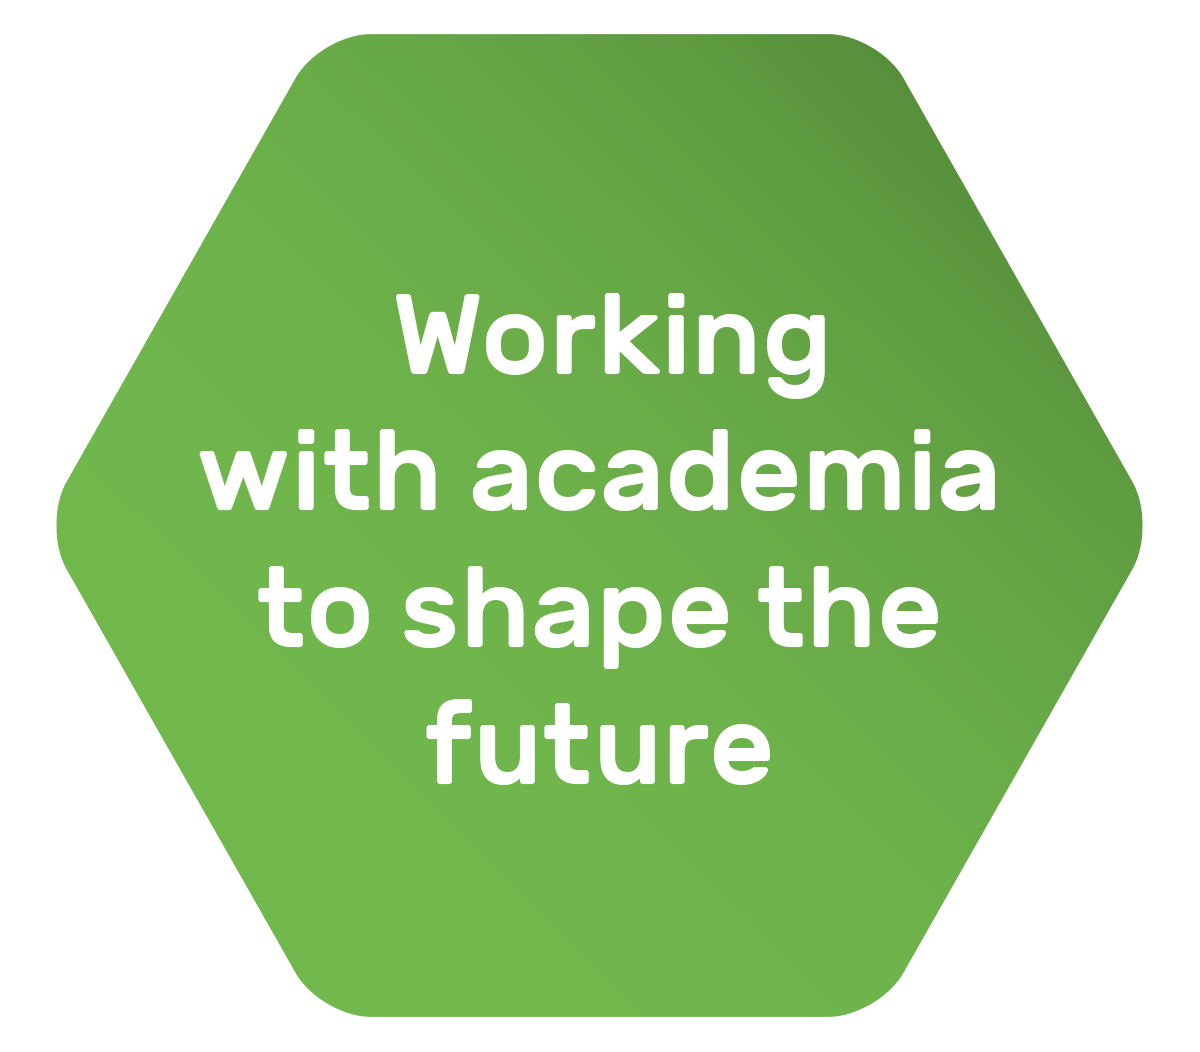  Working with academia to shape the future